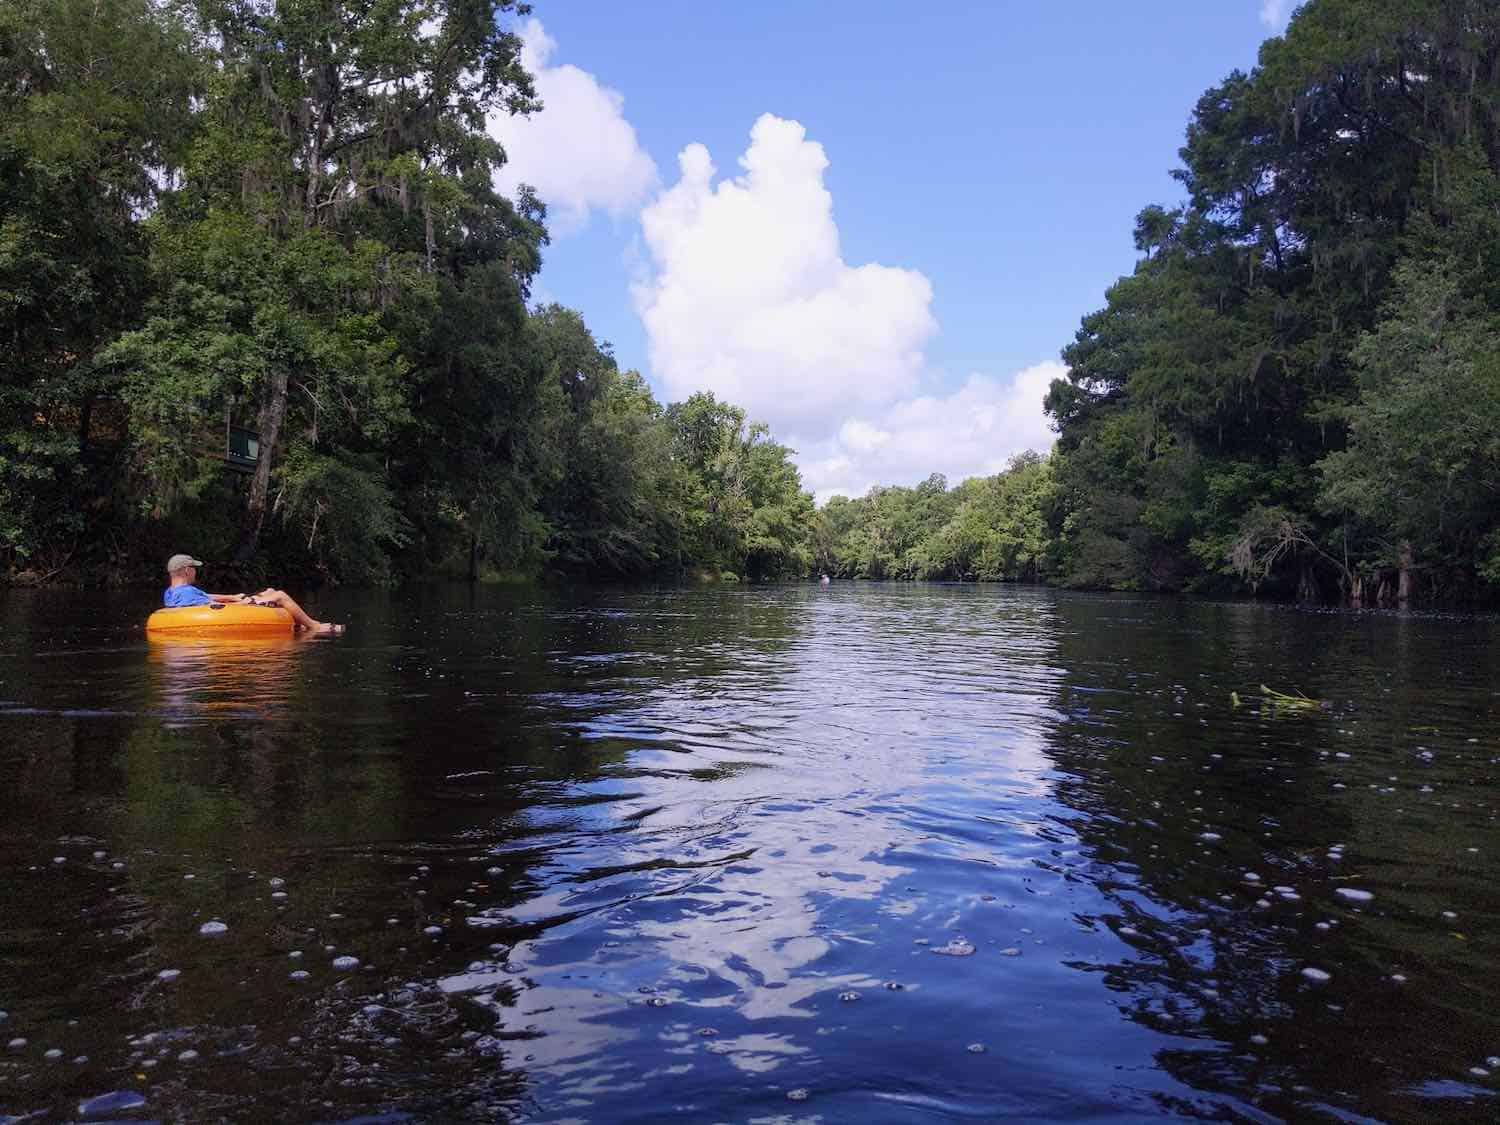 best places to visit in north central florida